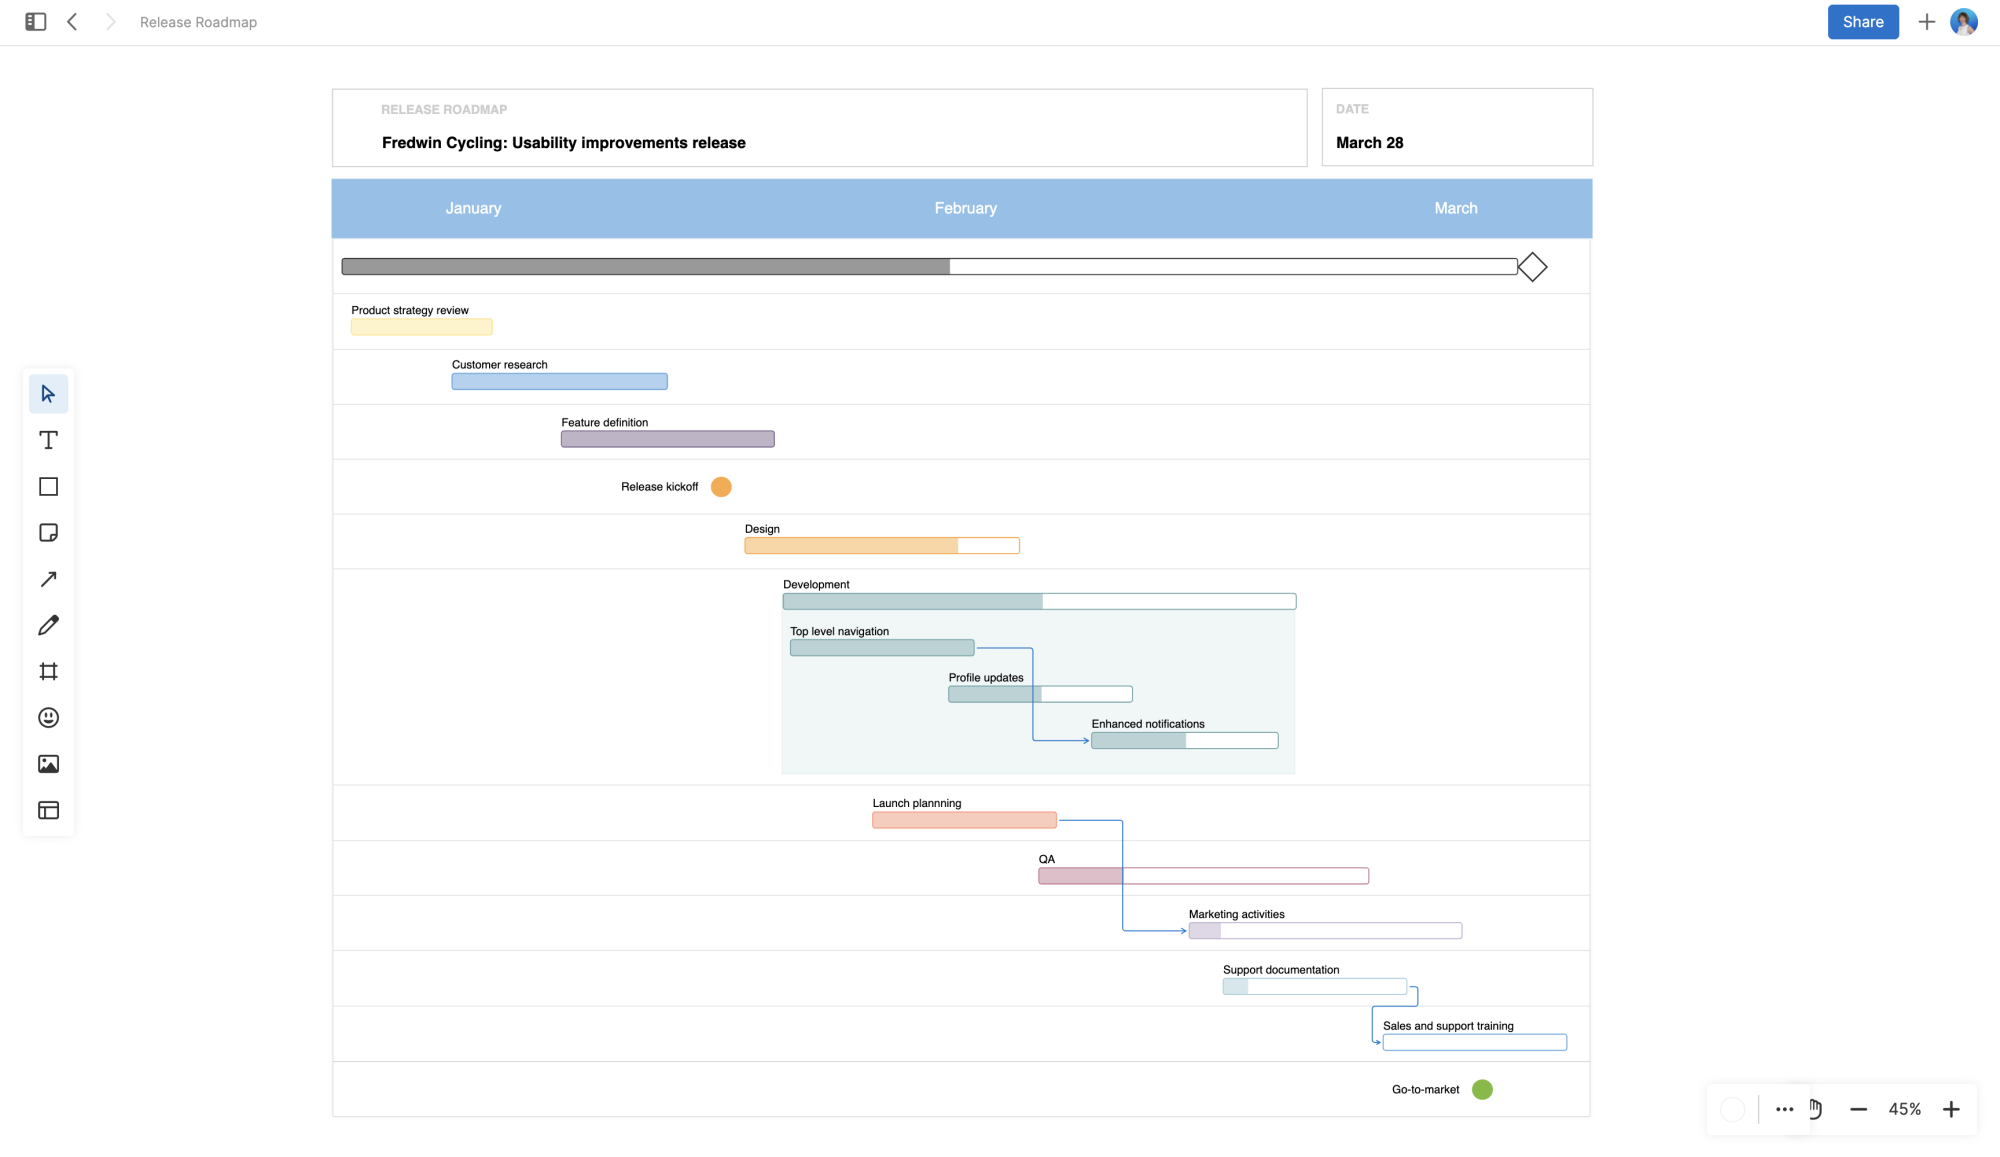 Use connectors to show dependencies between deliverables on your roadmap.